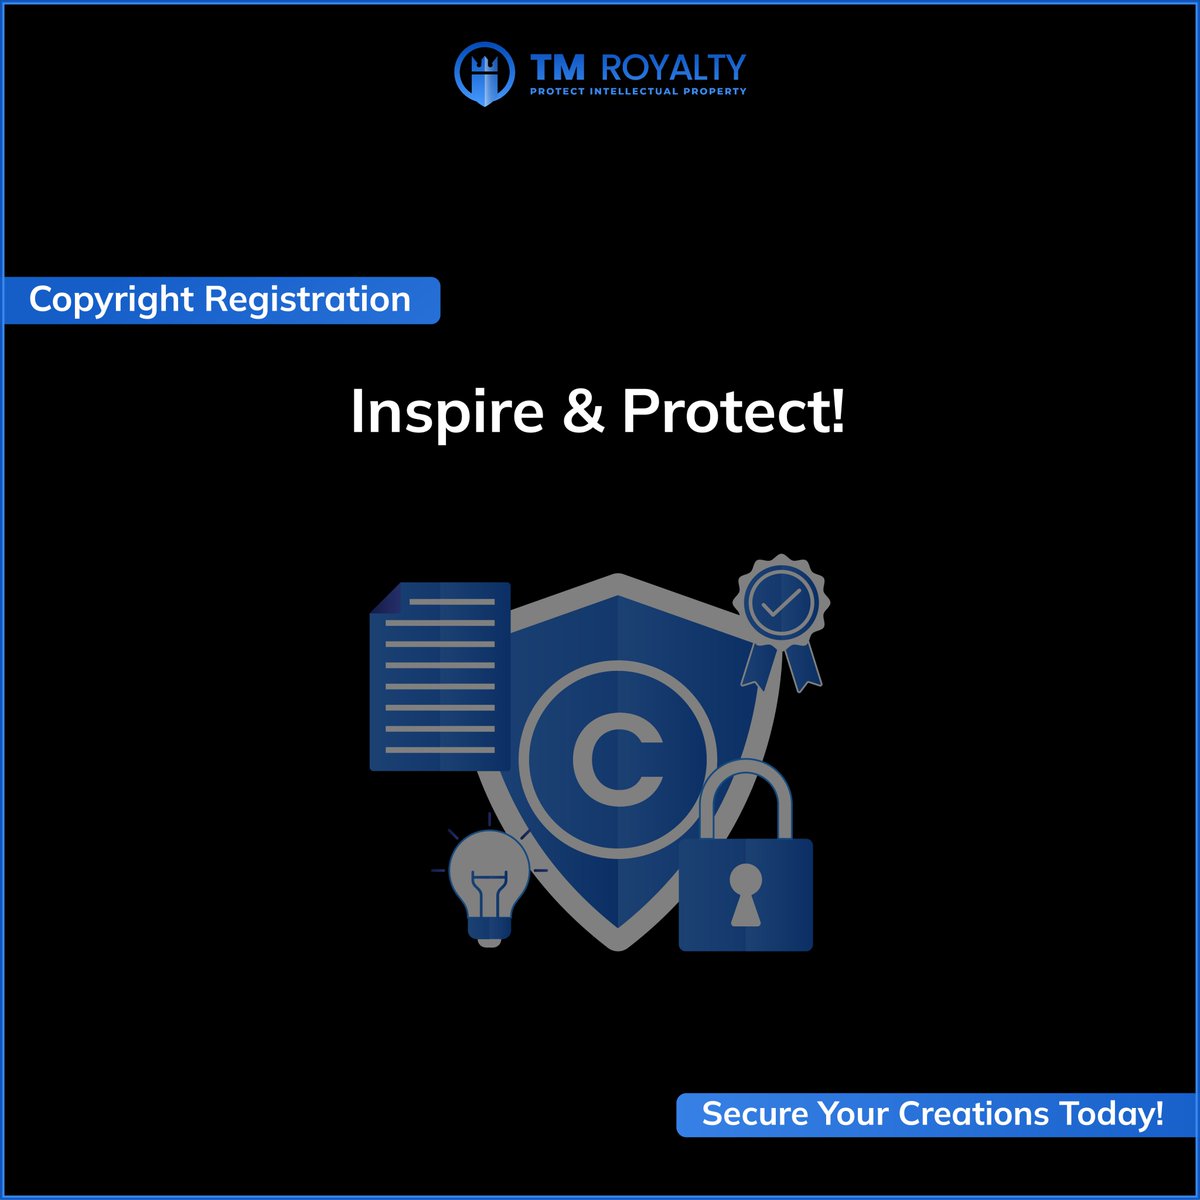 Copyright registration ensures your creations remain exclusively yours. Let us help you navigate the process so your brilliance remains untarnished. 

trademarkroyalty.com
+1 866-320-0973
support@trademarkroyalty.com

#TrademarkRoyalty #CopyrightRegistration #ProtectCreativity